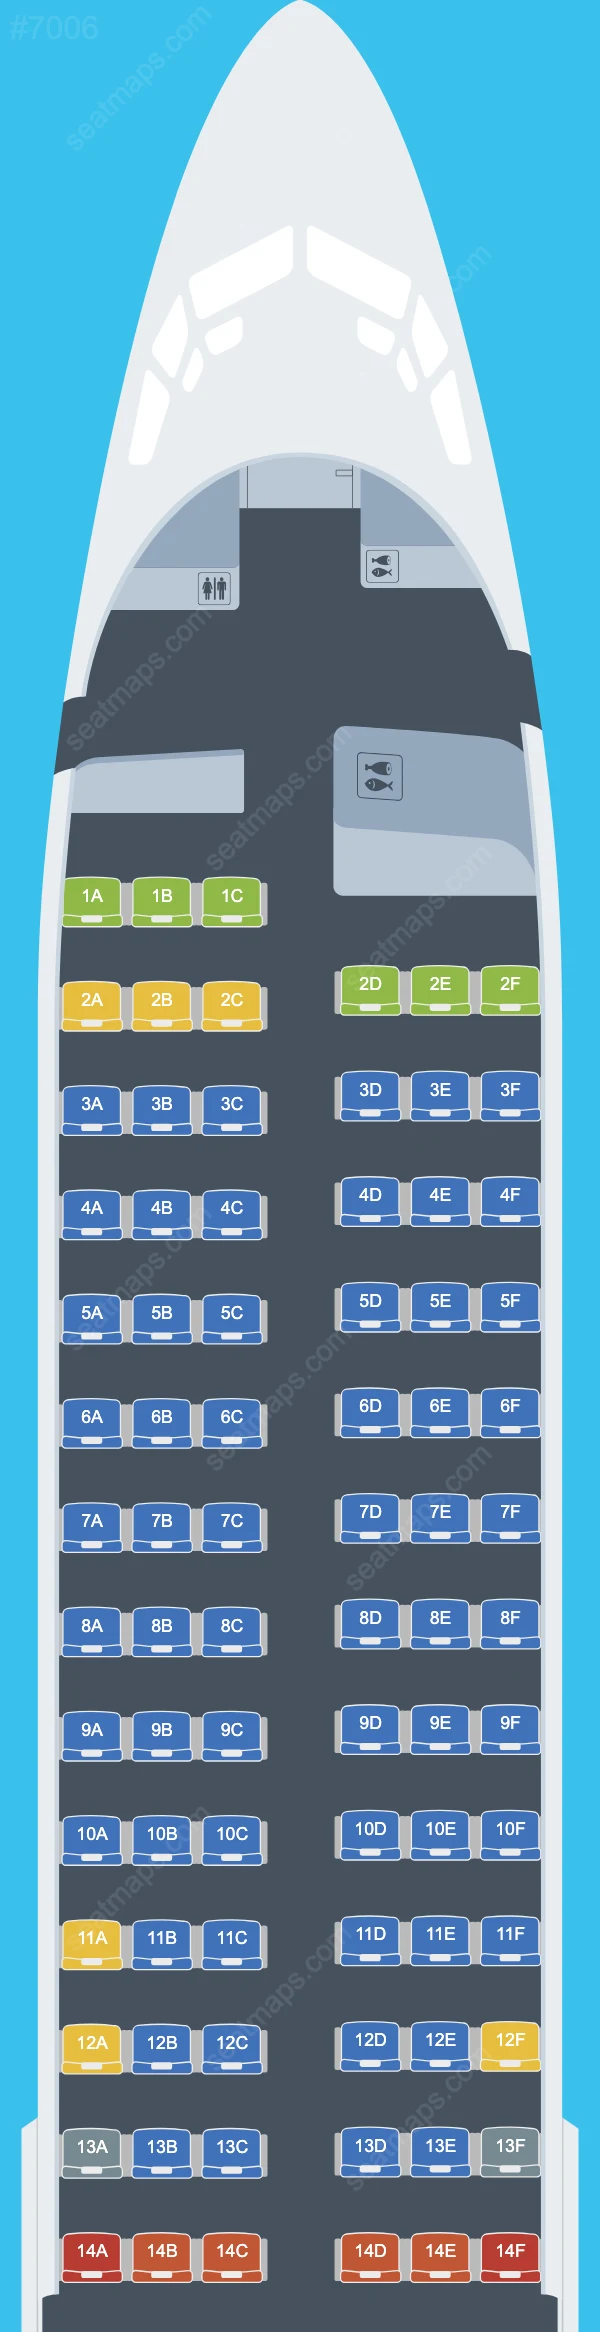 Lucky Air Boeing 737 Seat Maps 737-800 V.1